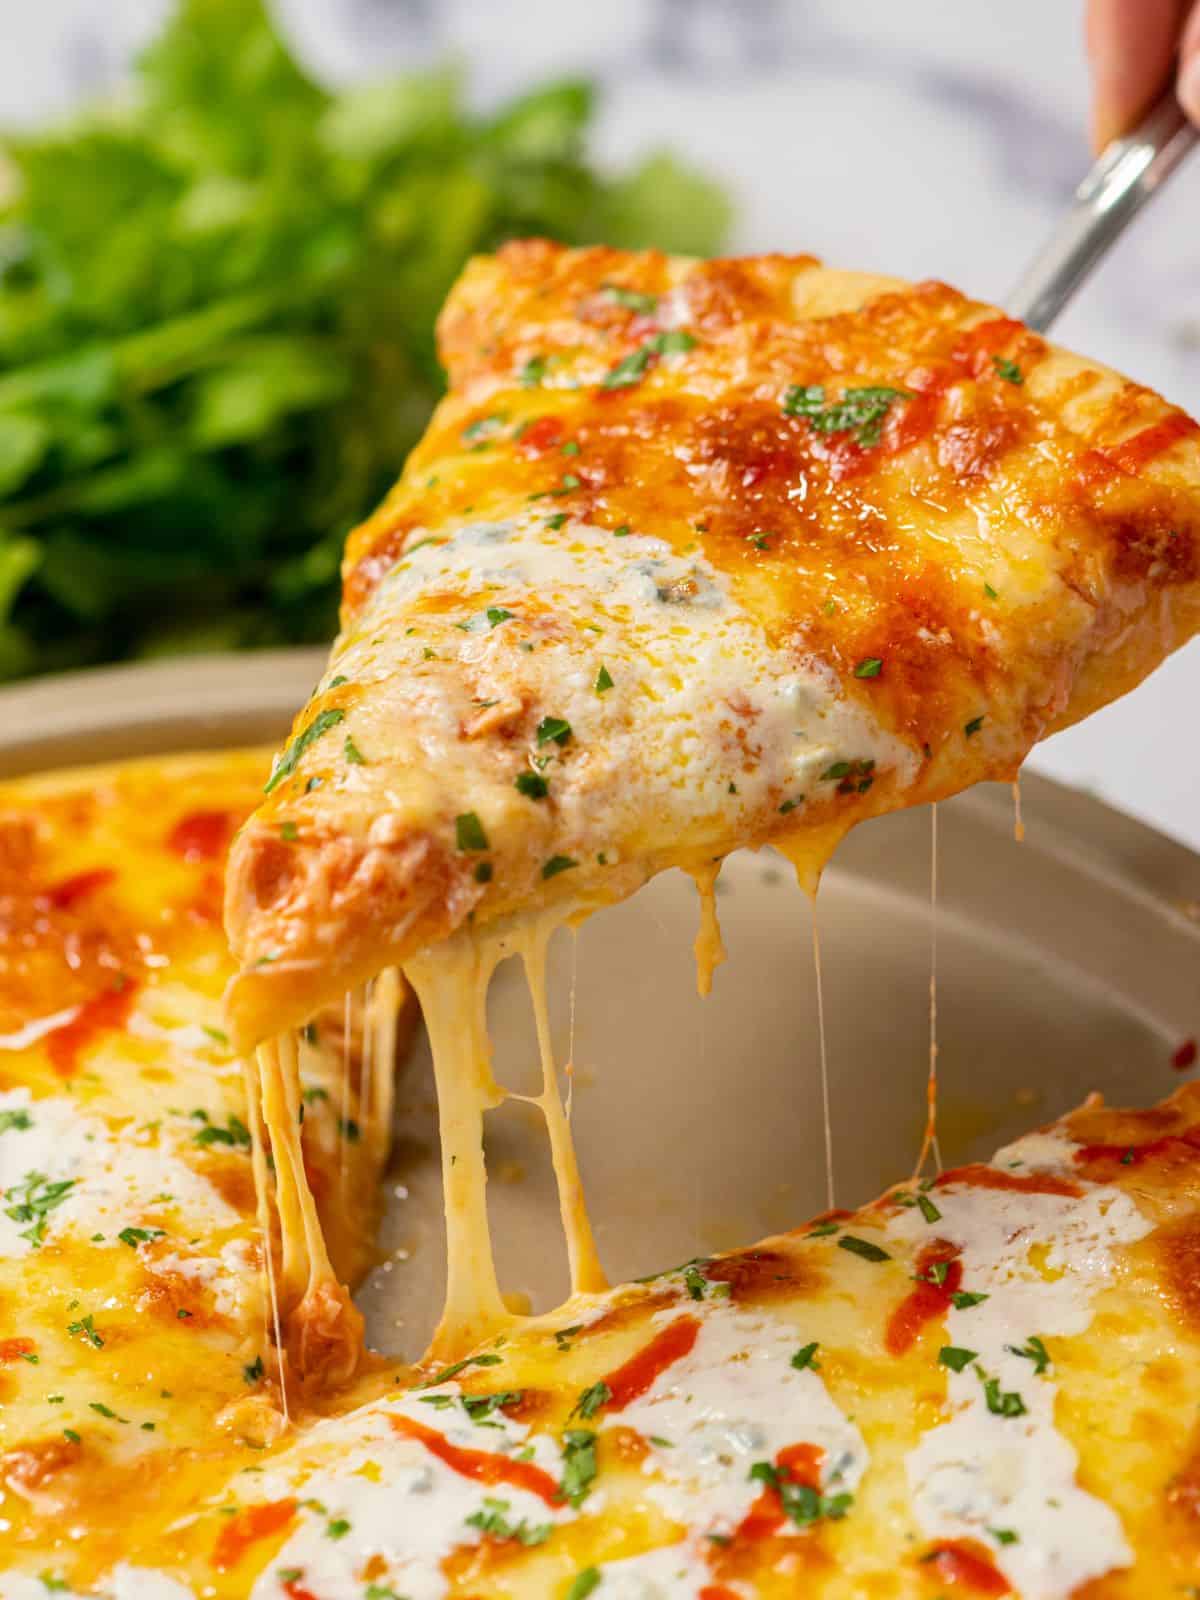 Slice of buffalo chicken pizza being removed from pizza pan, showing cheese pull.